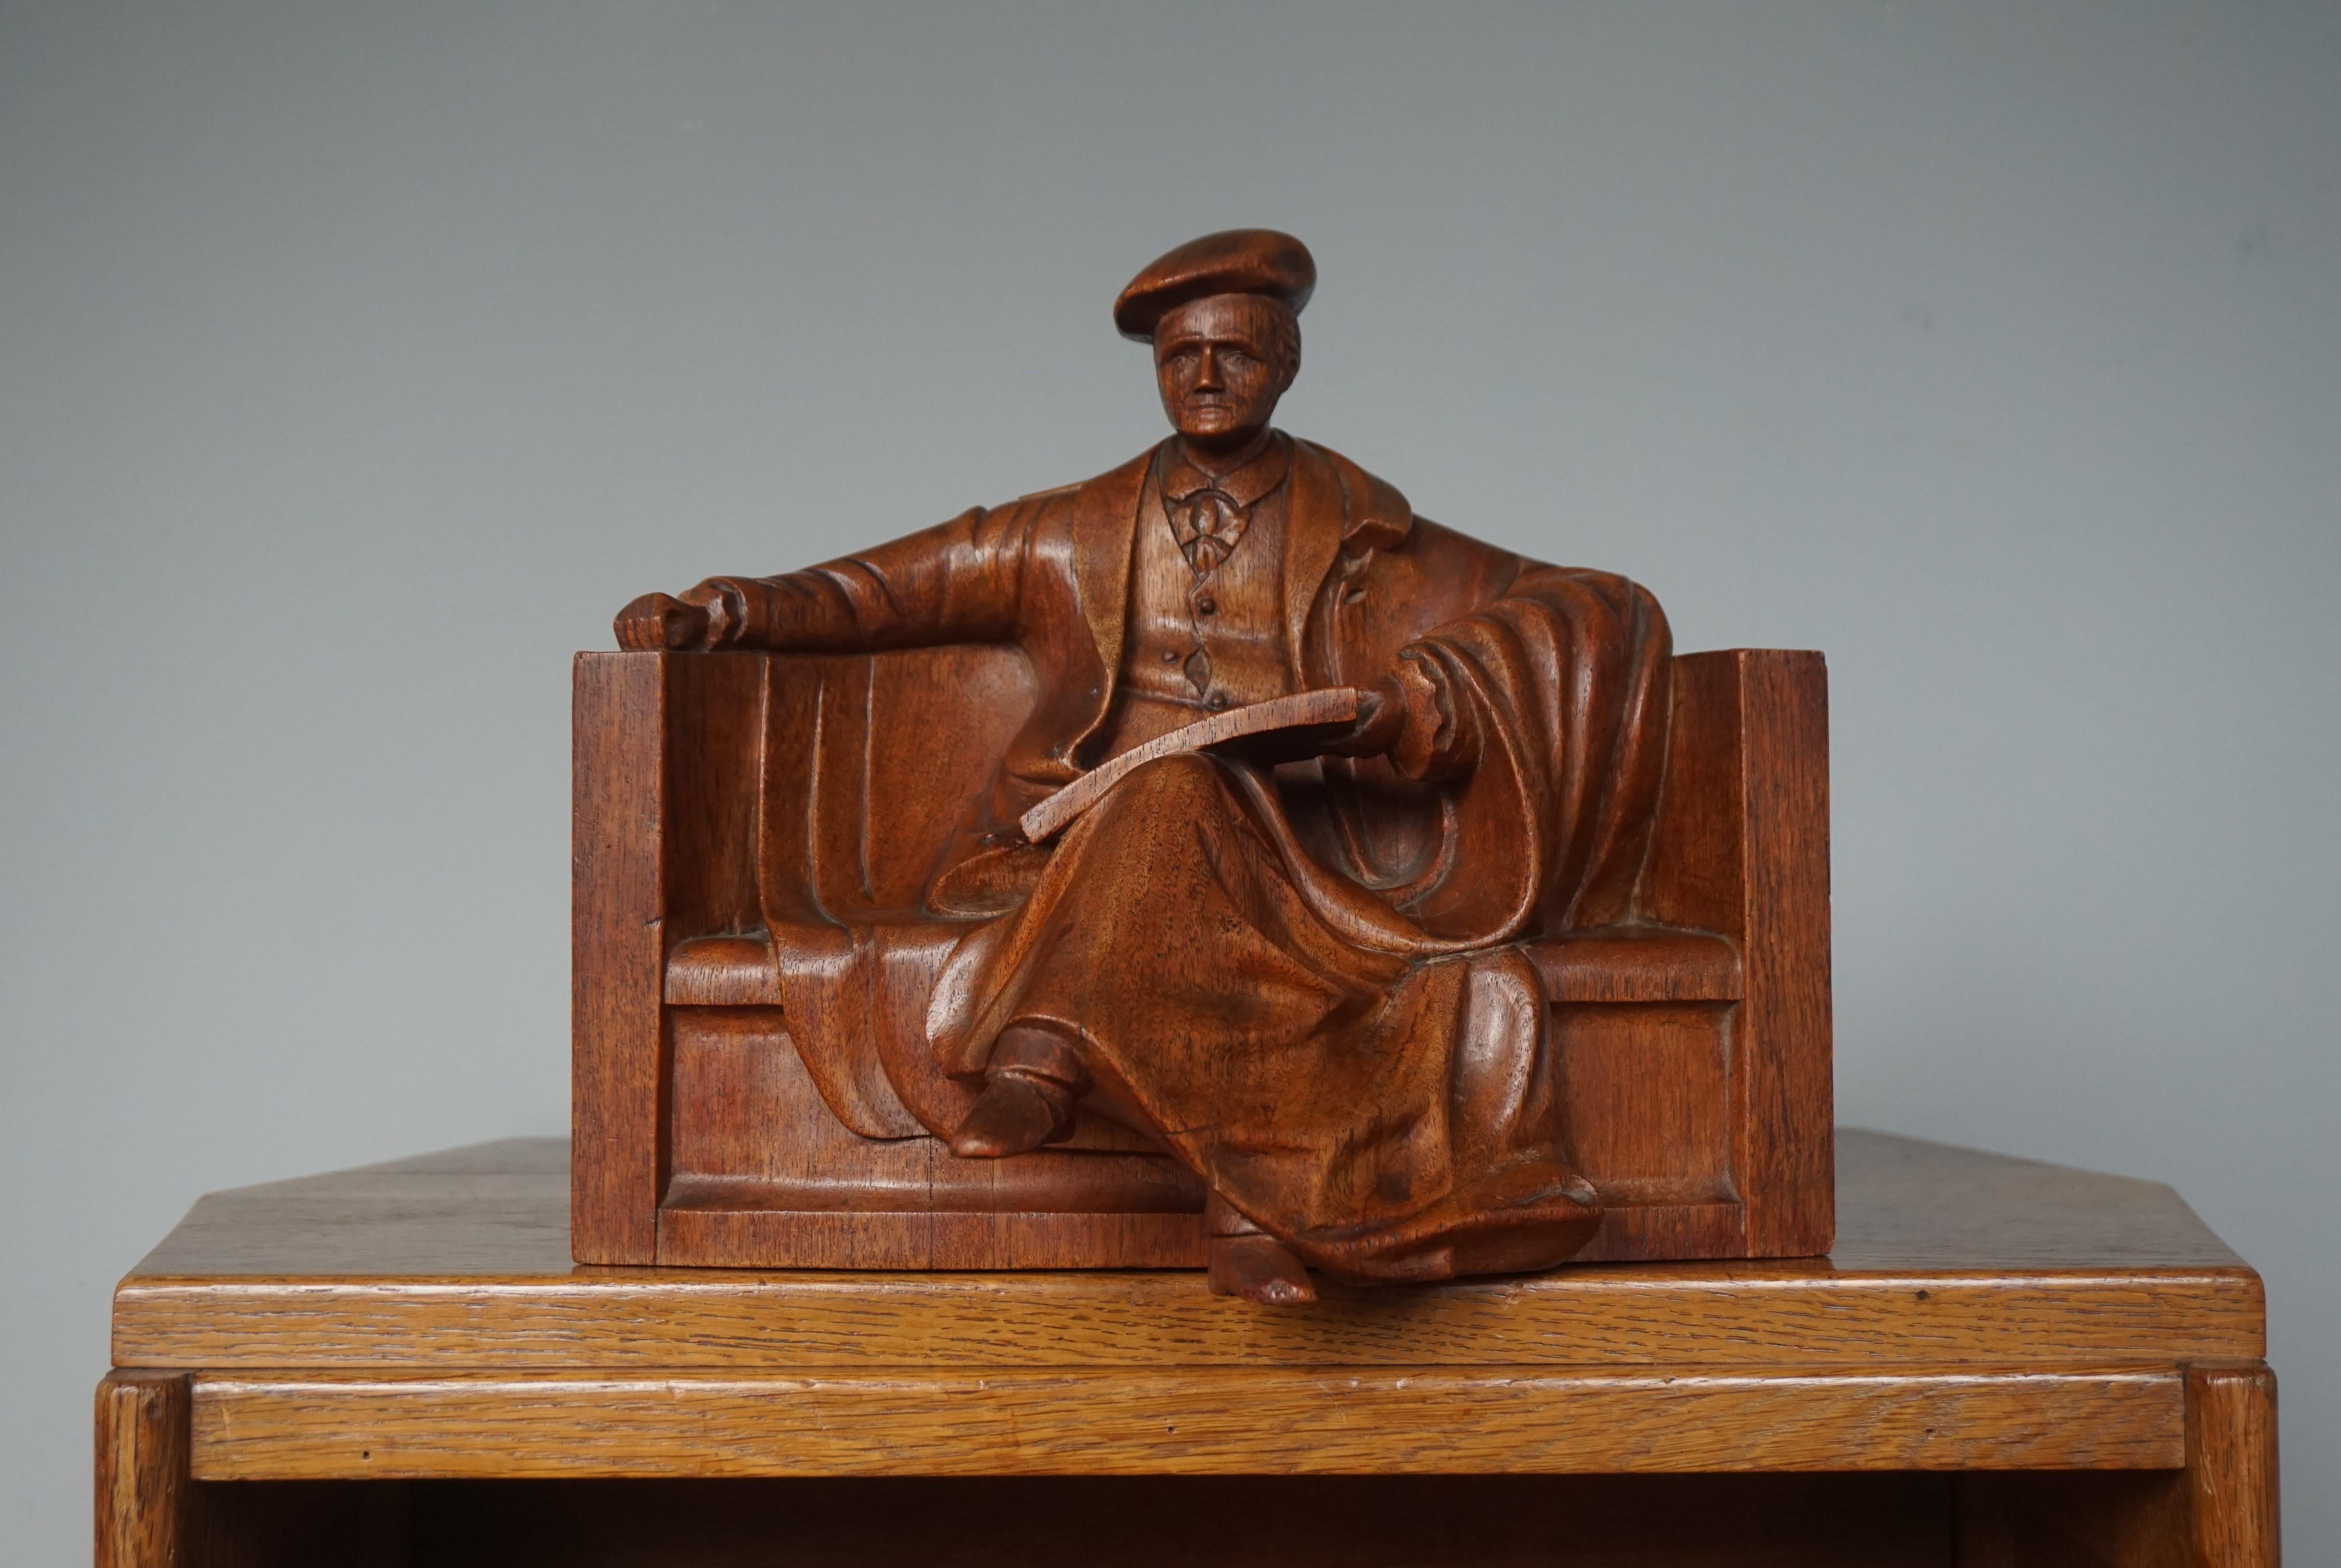 One of a kind sculpture of a well dressed male professor in a rounded chair.

With early 20th century decorative antiques as one of our specialities we were thrilled to find this hand carved sculpture. First of all, because of the subject matter,